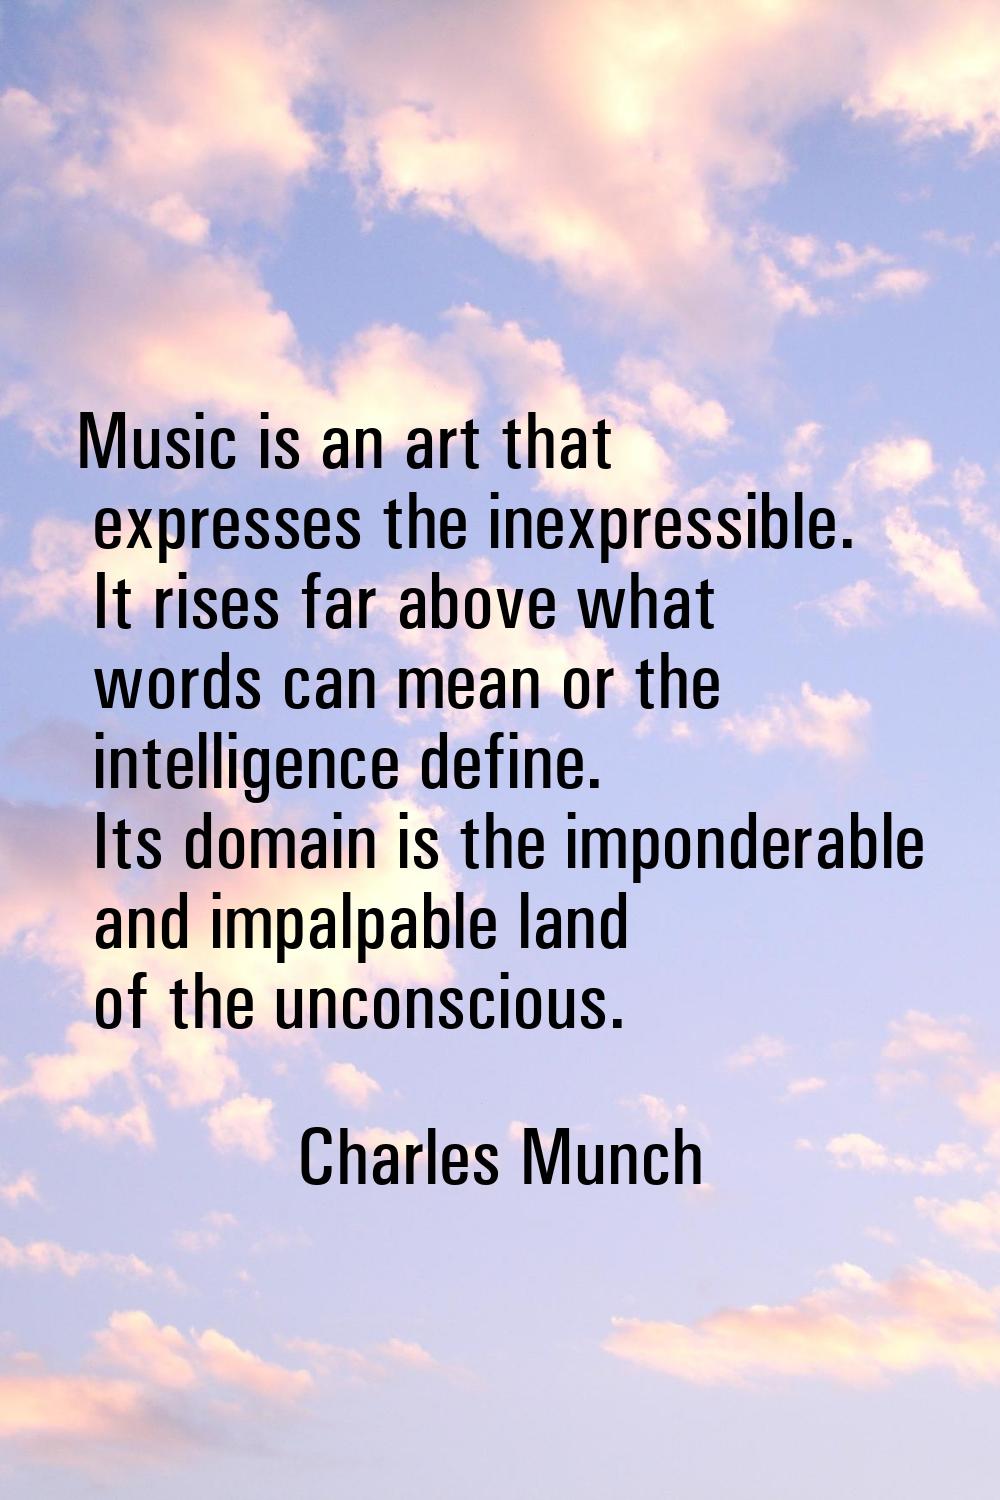 Music is an art that expresses the inexpressible. It rises far above what words can mean or the int